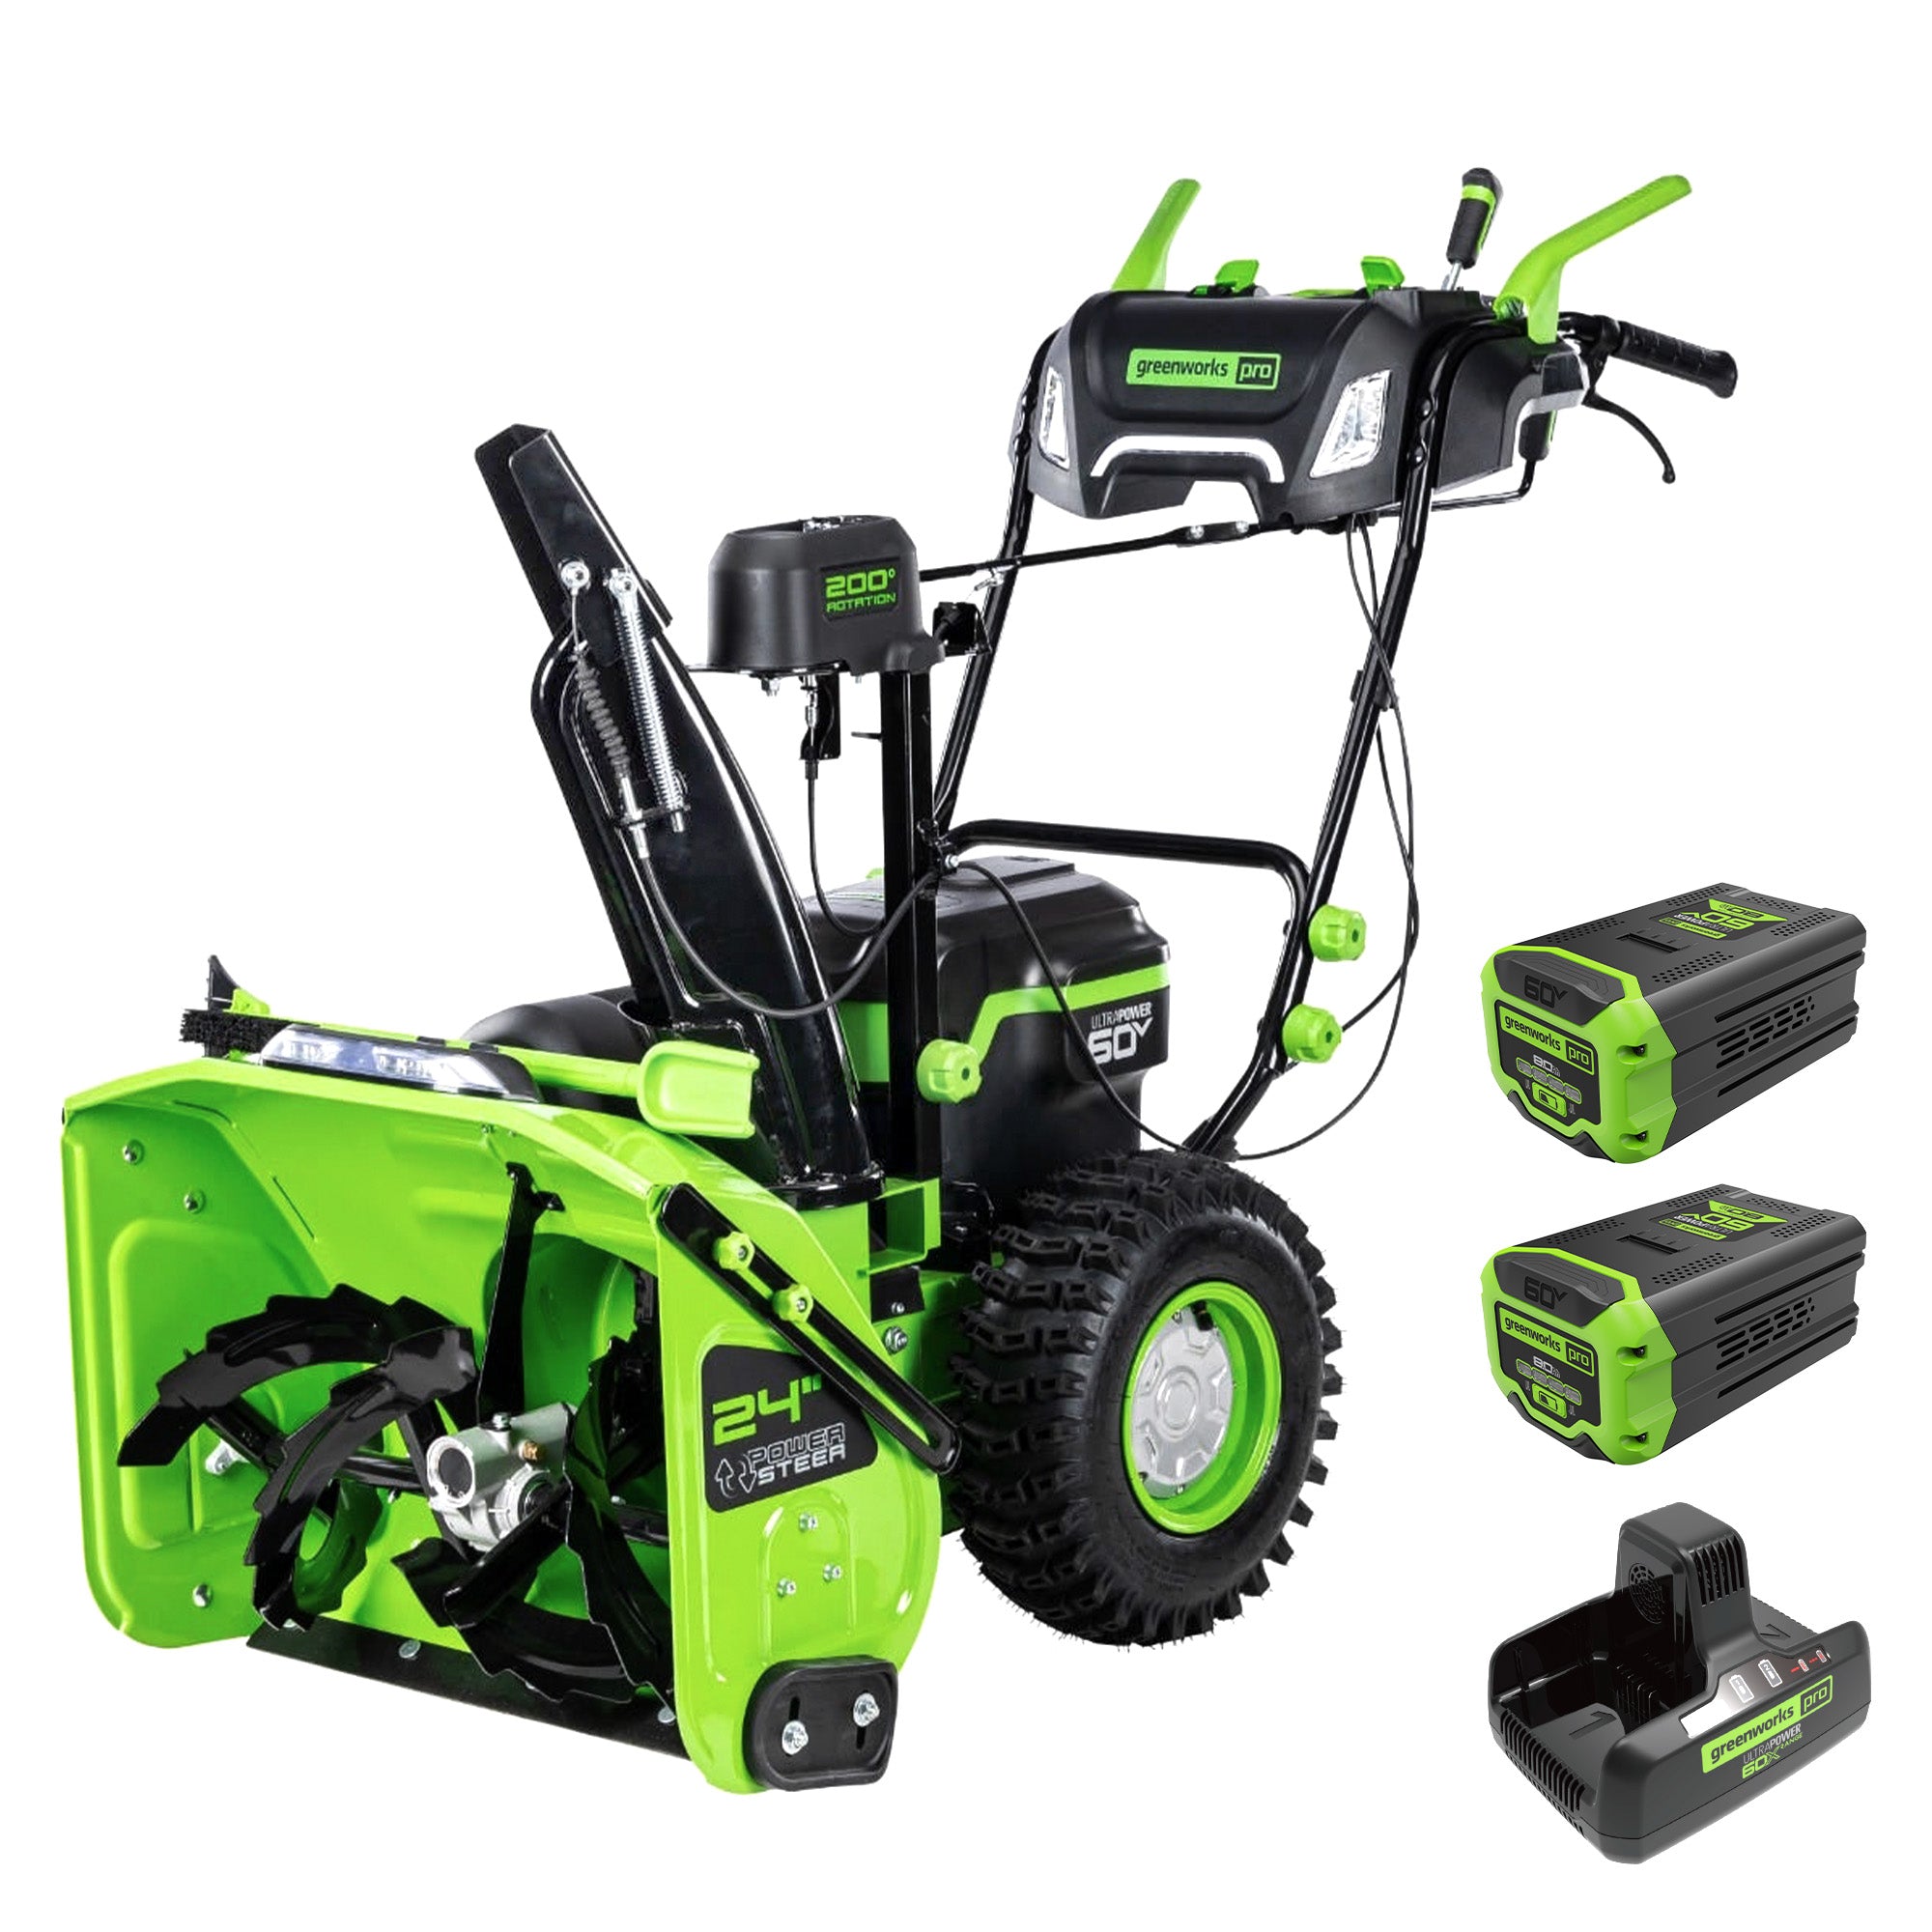 Greenworks 60V 24" Cordless Battery Two-Stage Snow Blower w/ Two (2) 8.0 Ah Batteries & Dual-Port Charger + Free Shipping $1400